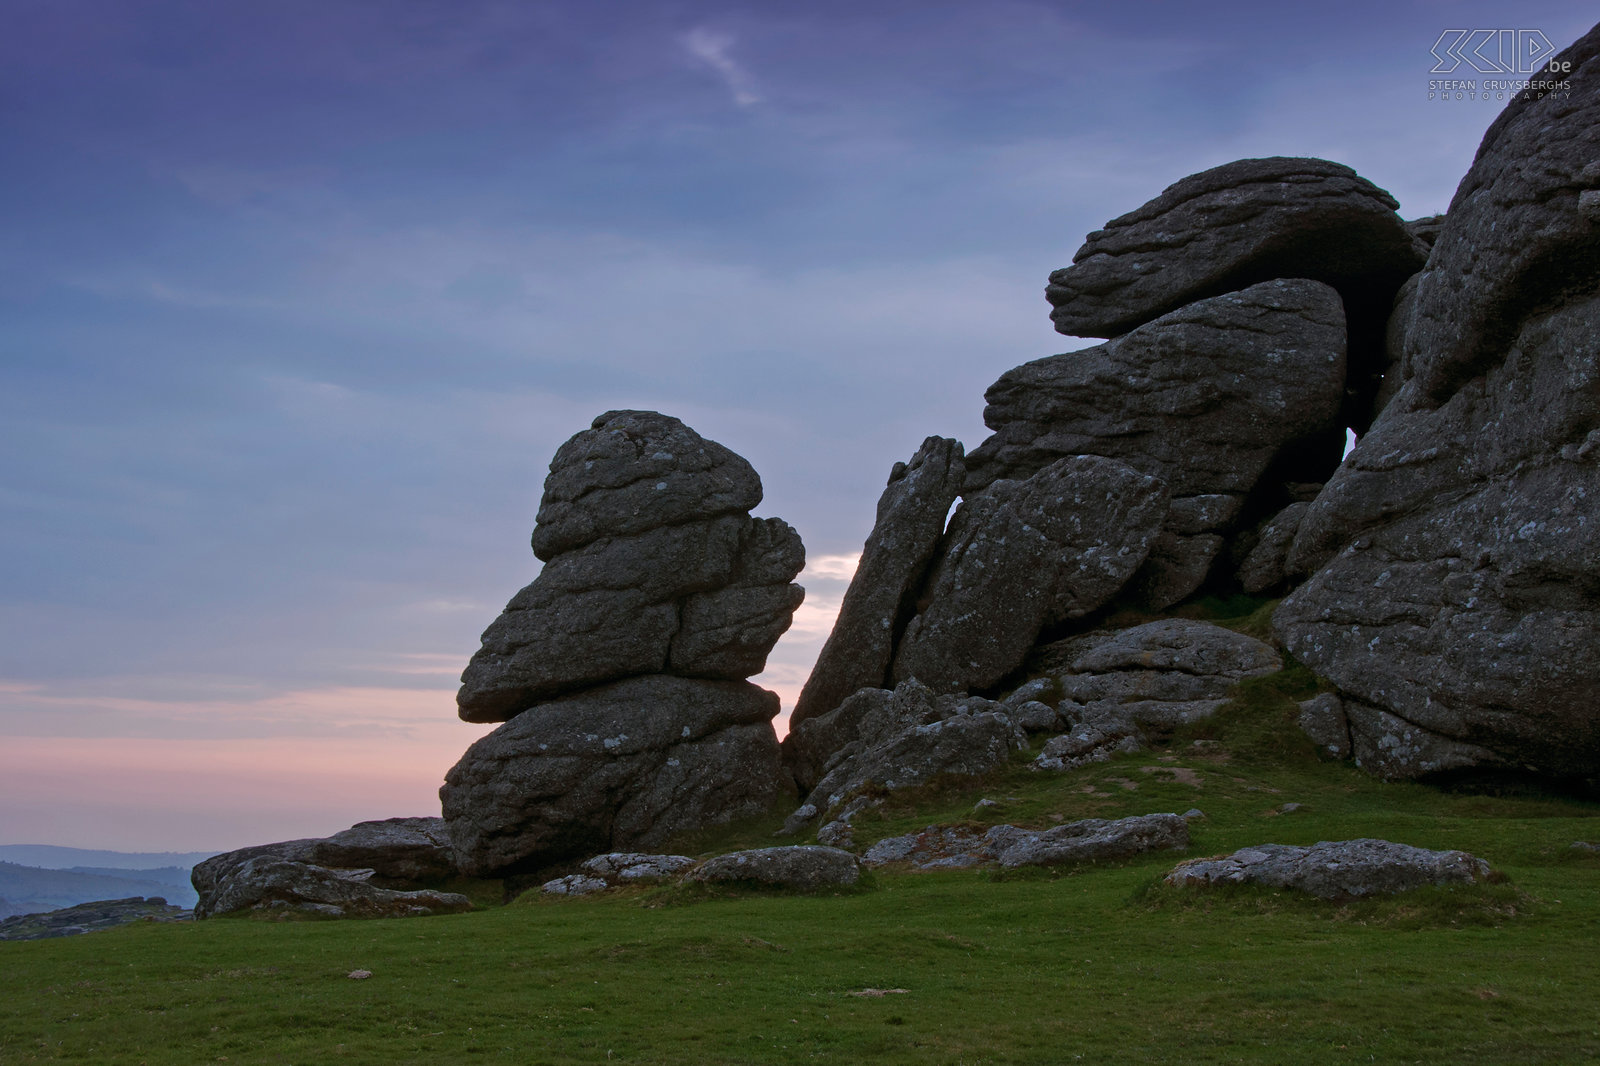 Dartmoor - Sunise at Saddle Tor An early sunrise at the impressive rock formations of Saddle Tor. Stefan Cruysberghs